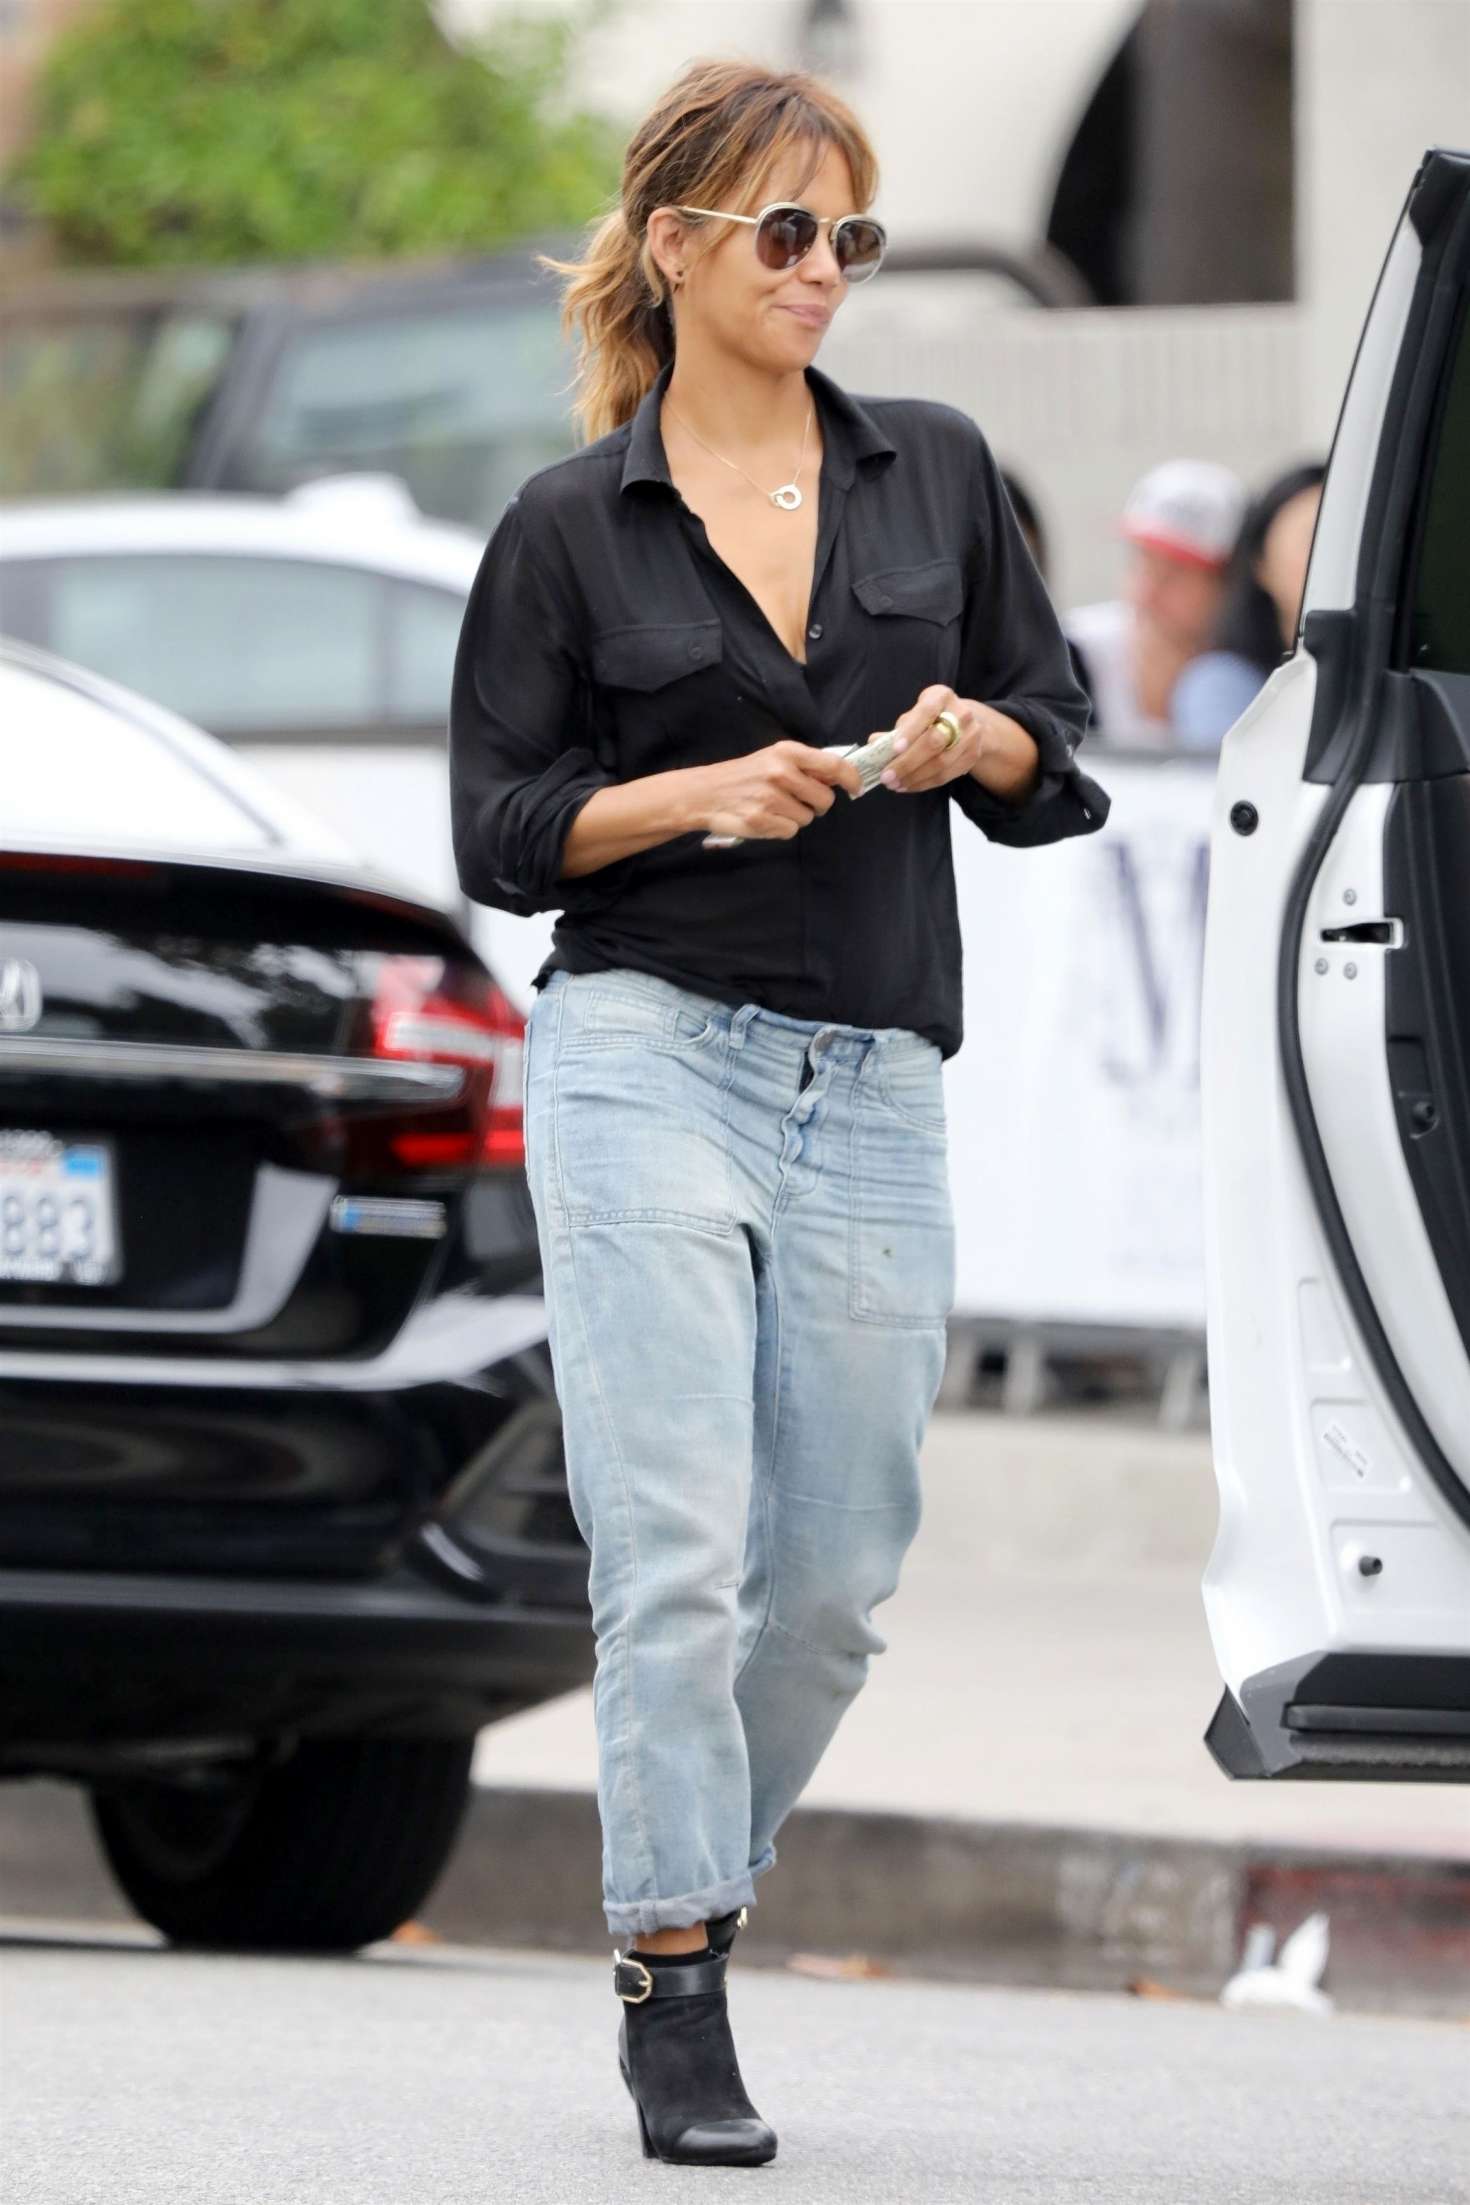 Halle Berry 2018 : Halle Berry at District Eatery -13